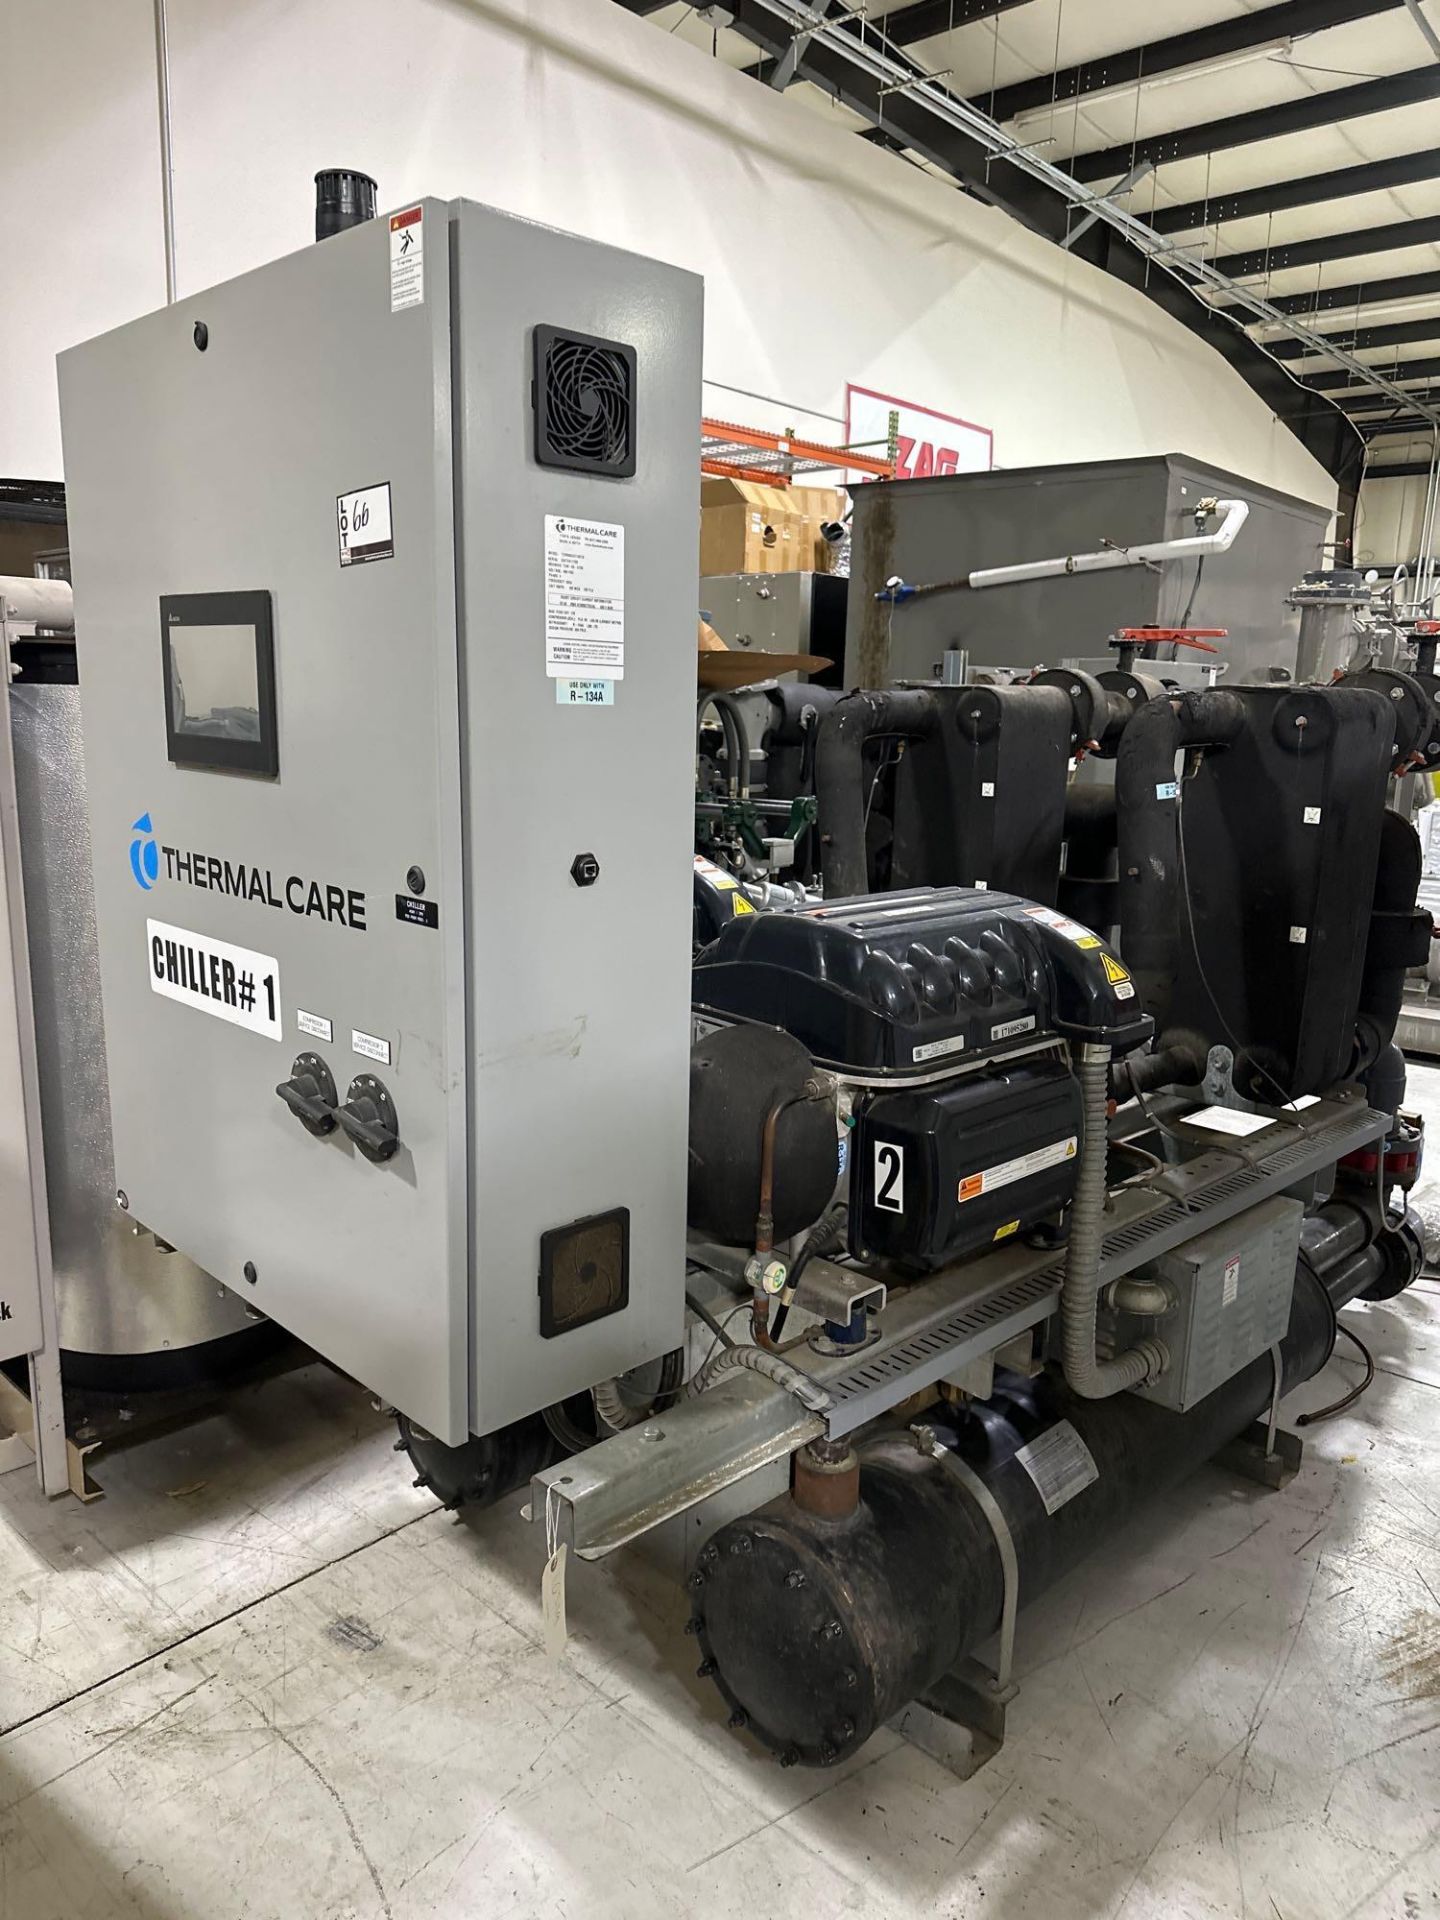 Thermal Care TCW600C411401N Chiller, 180 Ton Centrifugal Chiller, (2) Compressors, 460V/3/60